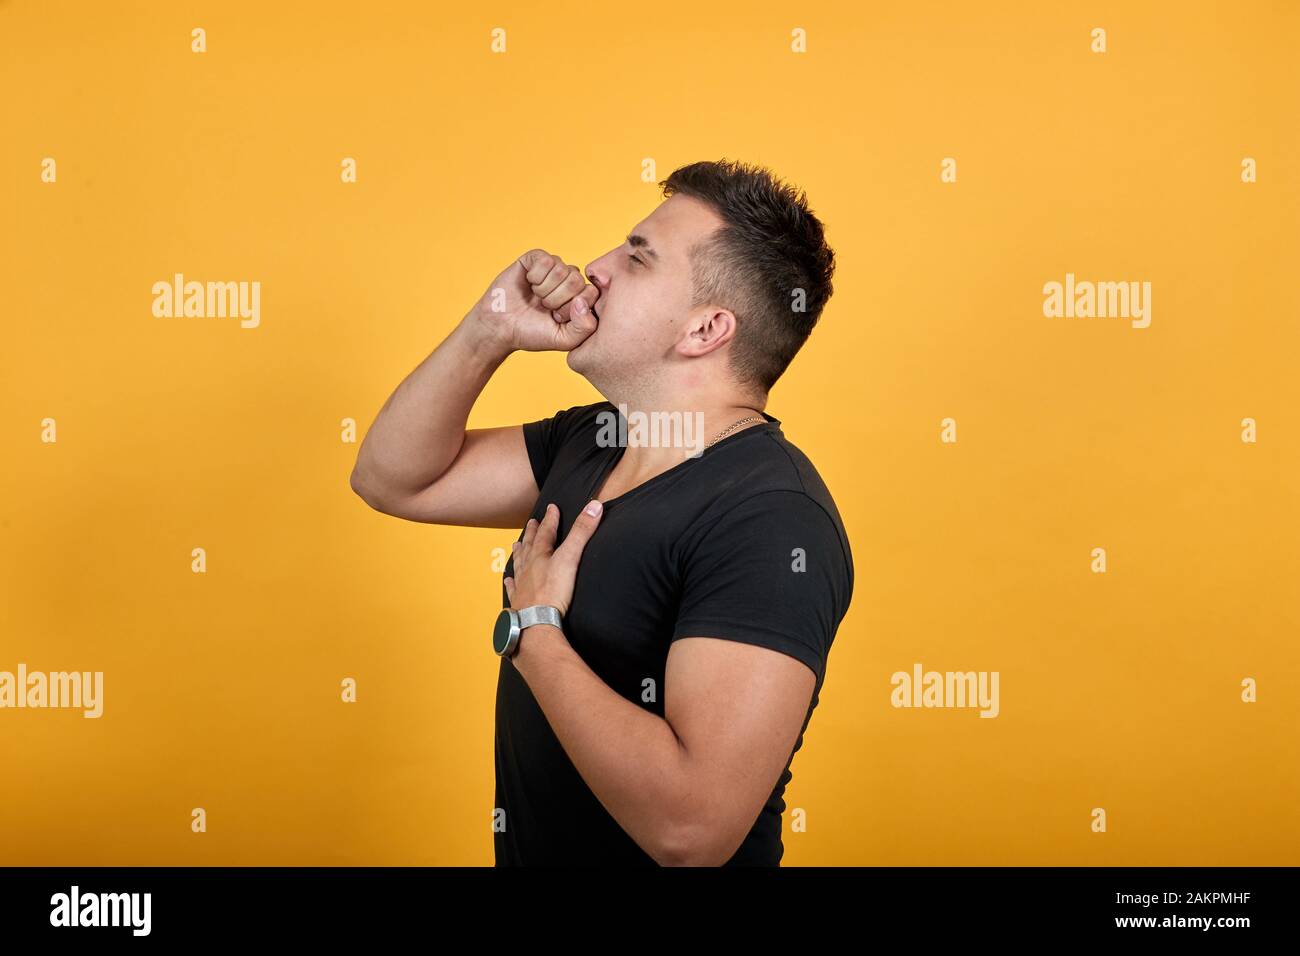 Sickness young man covered mouth with hand, cough, keeping hand on chest. Stock Photo